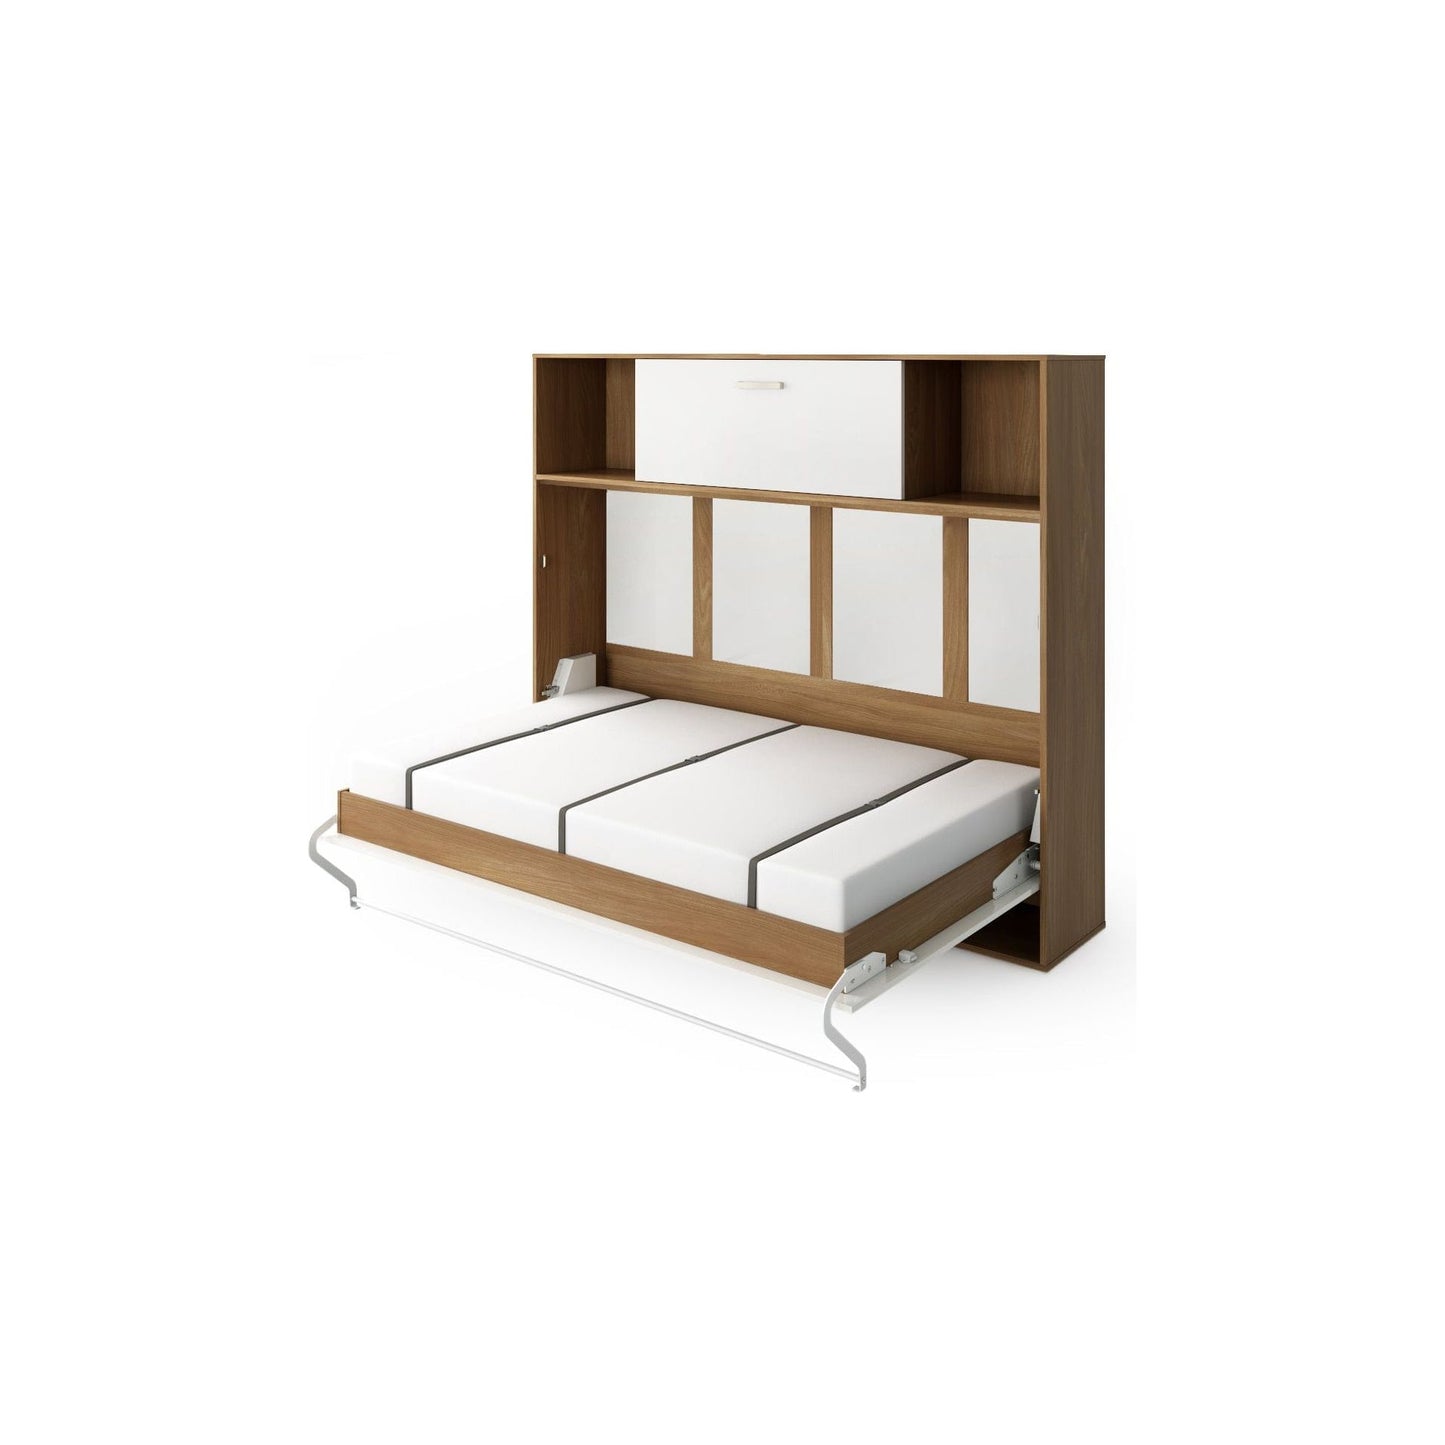 Maxima House Invento Horizontal Wall Bed, European Full XL Size with a cabinet on top